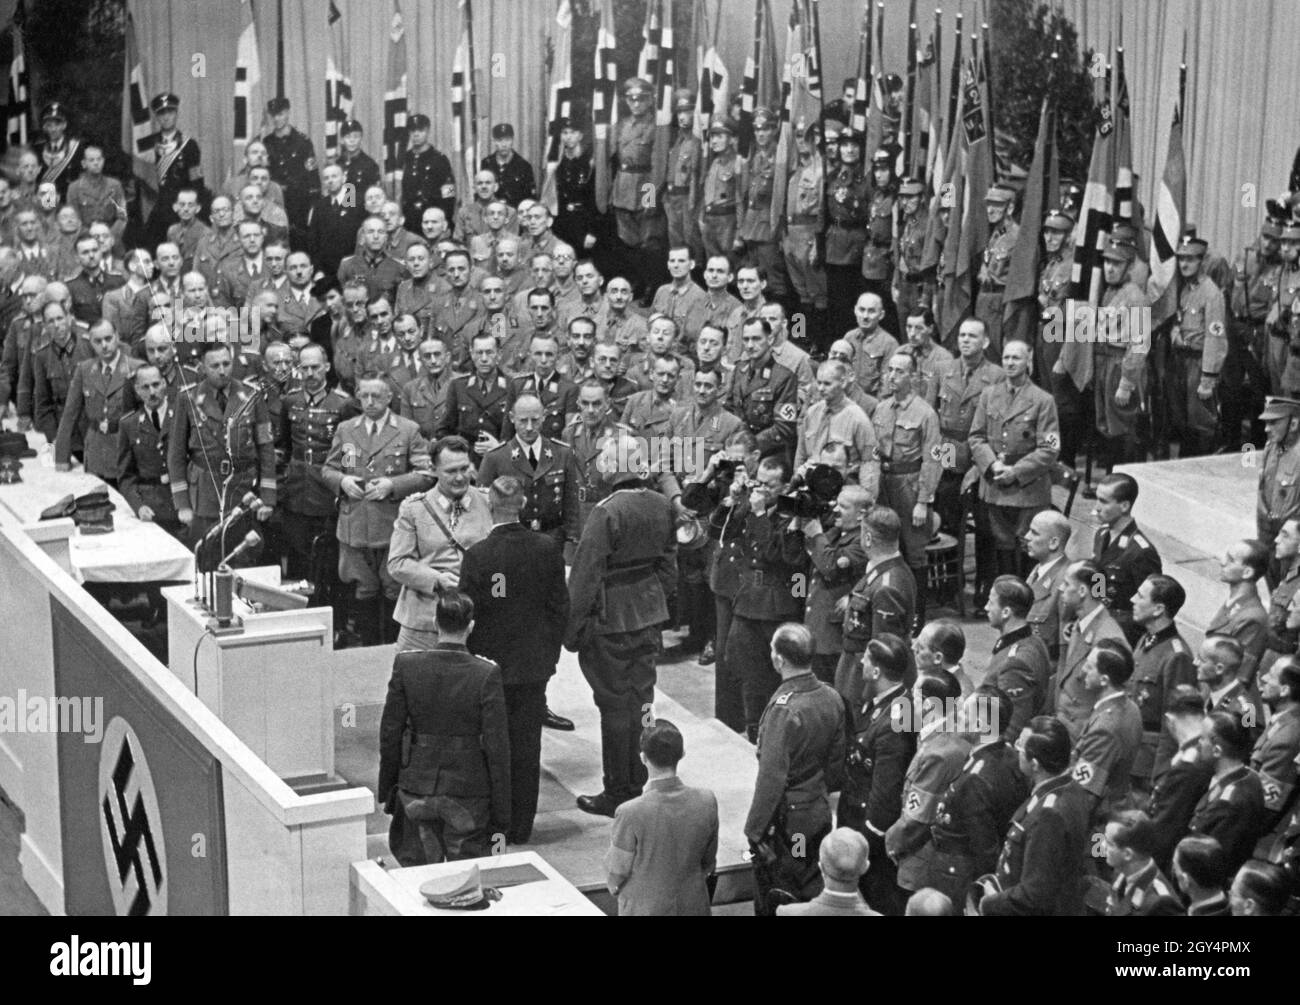 'On October 4, 1942, Thanksgiving Day, Reichsmarschall Hermann Göring (center, at the lectern) gave a ''Thanksgiving Speech'' at the Sportpalast in Berlin-Schöneberg. In the speech he assured to secure food for the ''German people'' in the approaching winter. Behind Göring on the right is Agriculture Minister Herbert Backe, and probably Joseph Goebbels in the center at the bottom of the picture. In the picture, Göring awards the Knight's Cross of the Order of Merit of the War to the farmer leader Ernst Ritter (black suit) and the farmer leader Fritz Leffler (next to him on the right). Stock Photo